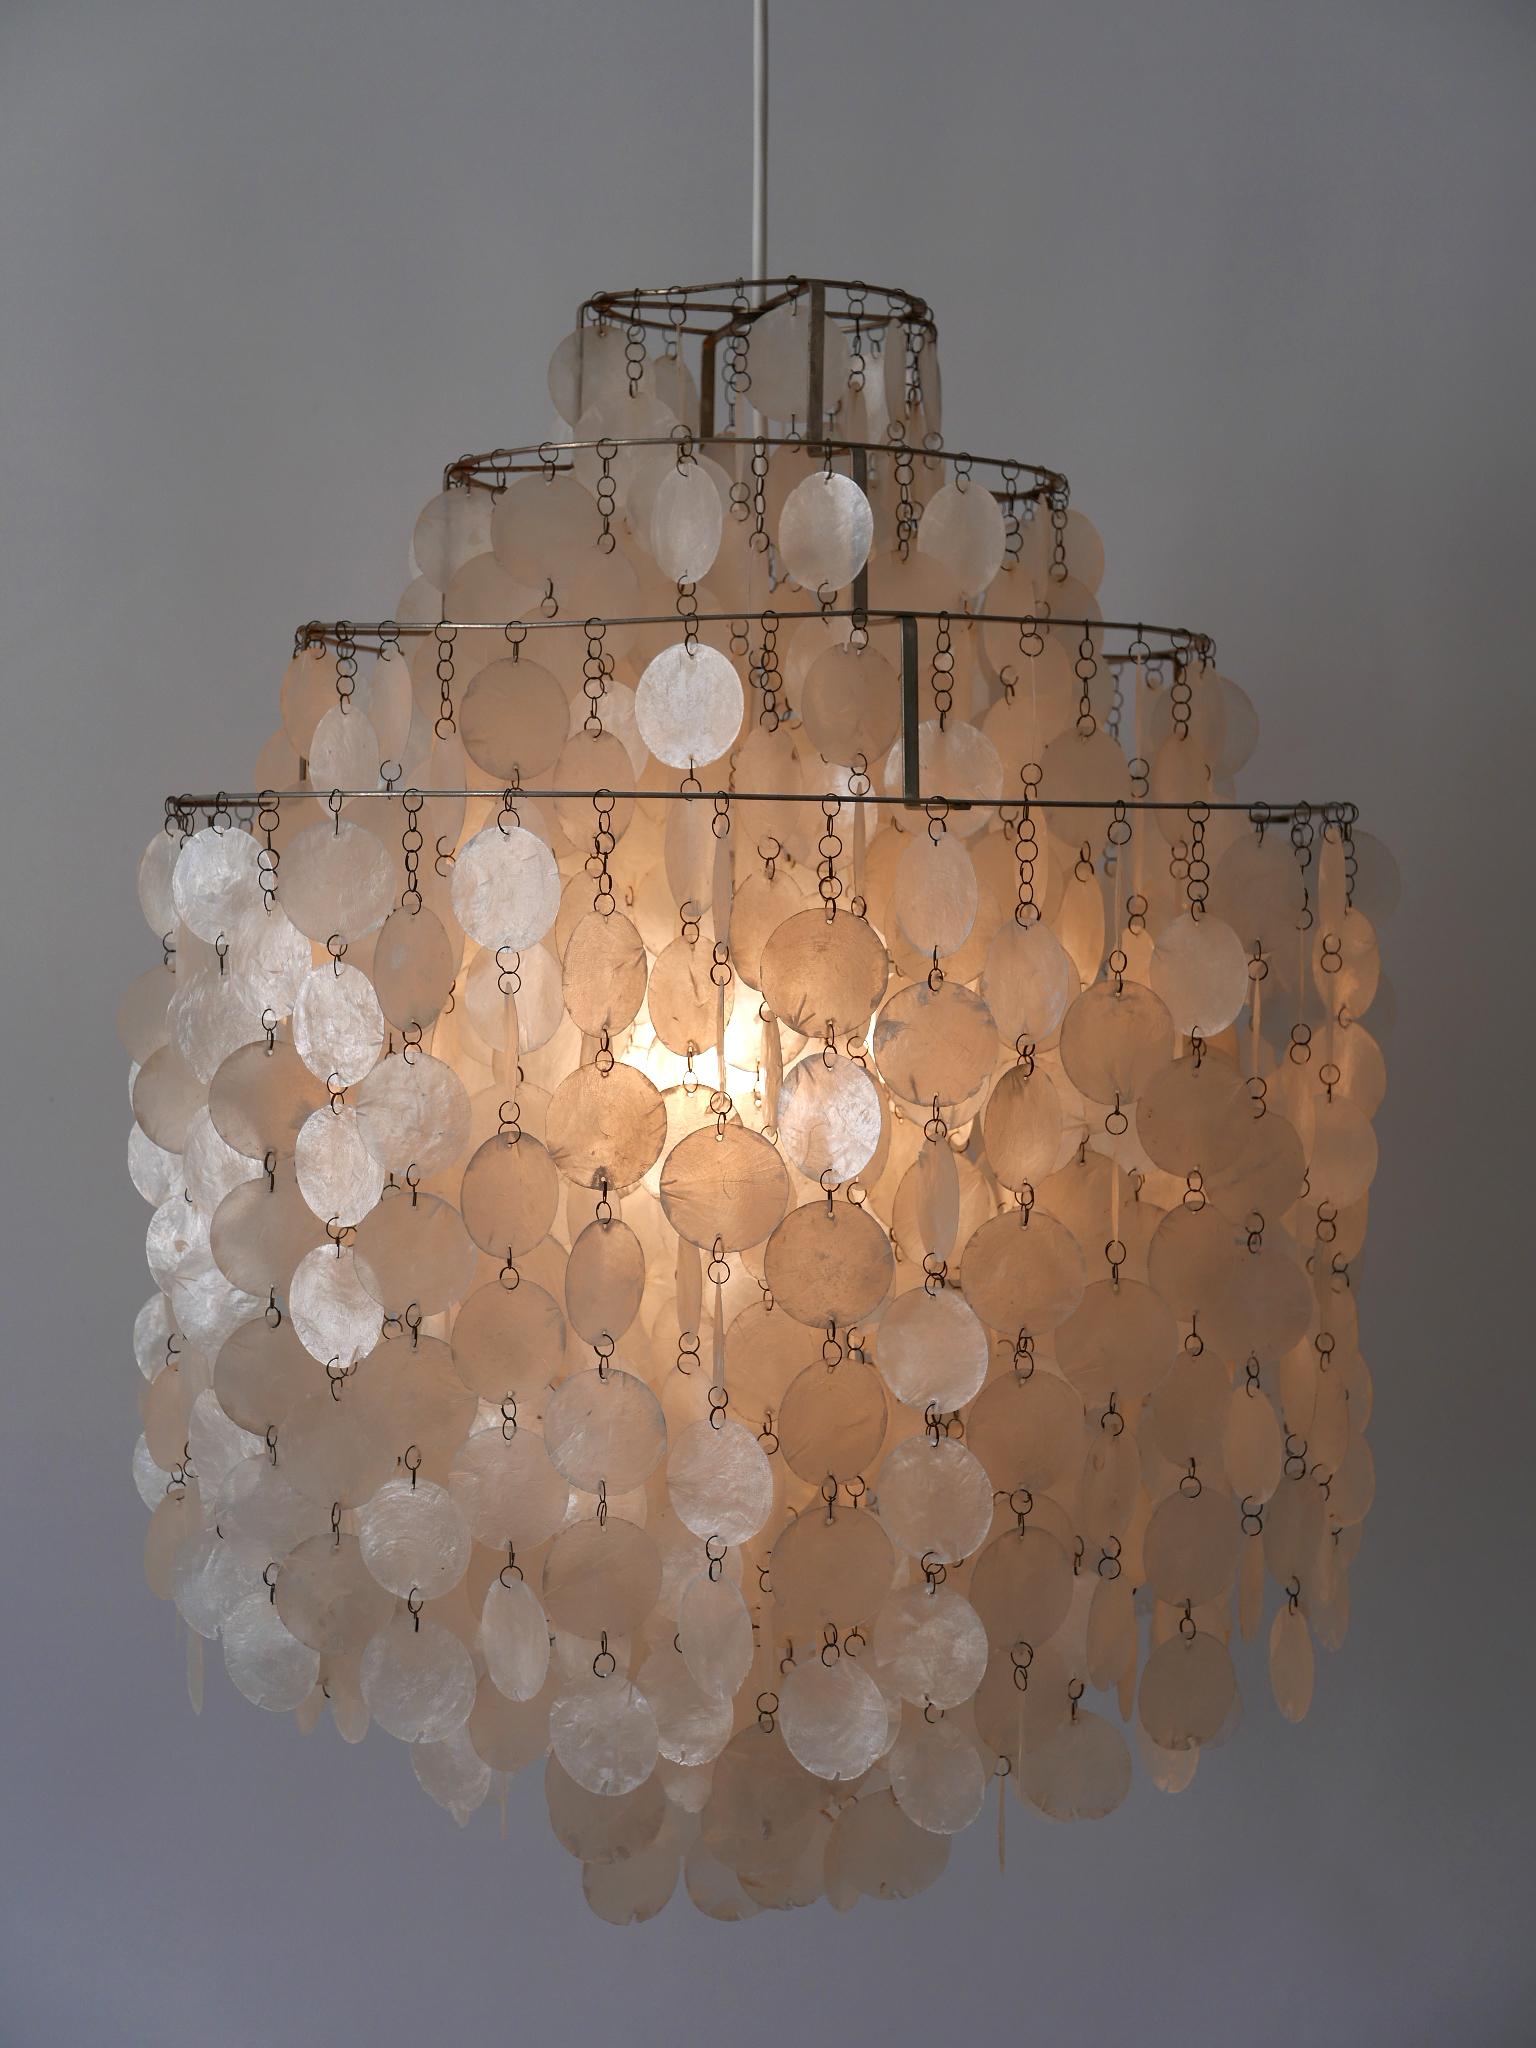 Gorgeous and original Mid-Century Modern pendant lamp or chandelier Fun 0 DM. Designed by Verner Panton in 1964. Manufactured by Lüber, Basel, Switzerland in 1960s.

This elegant pendant lamp is executed in numerous sea shell plates (mother of